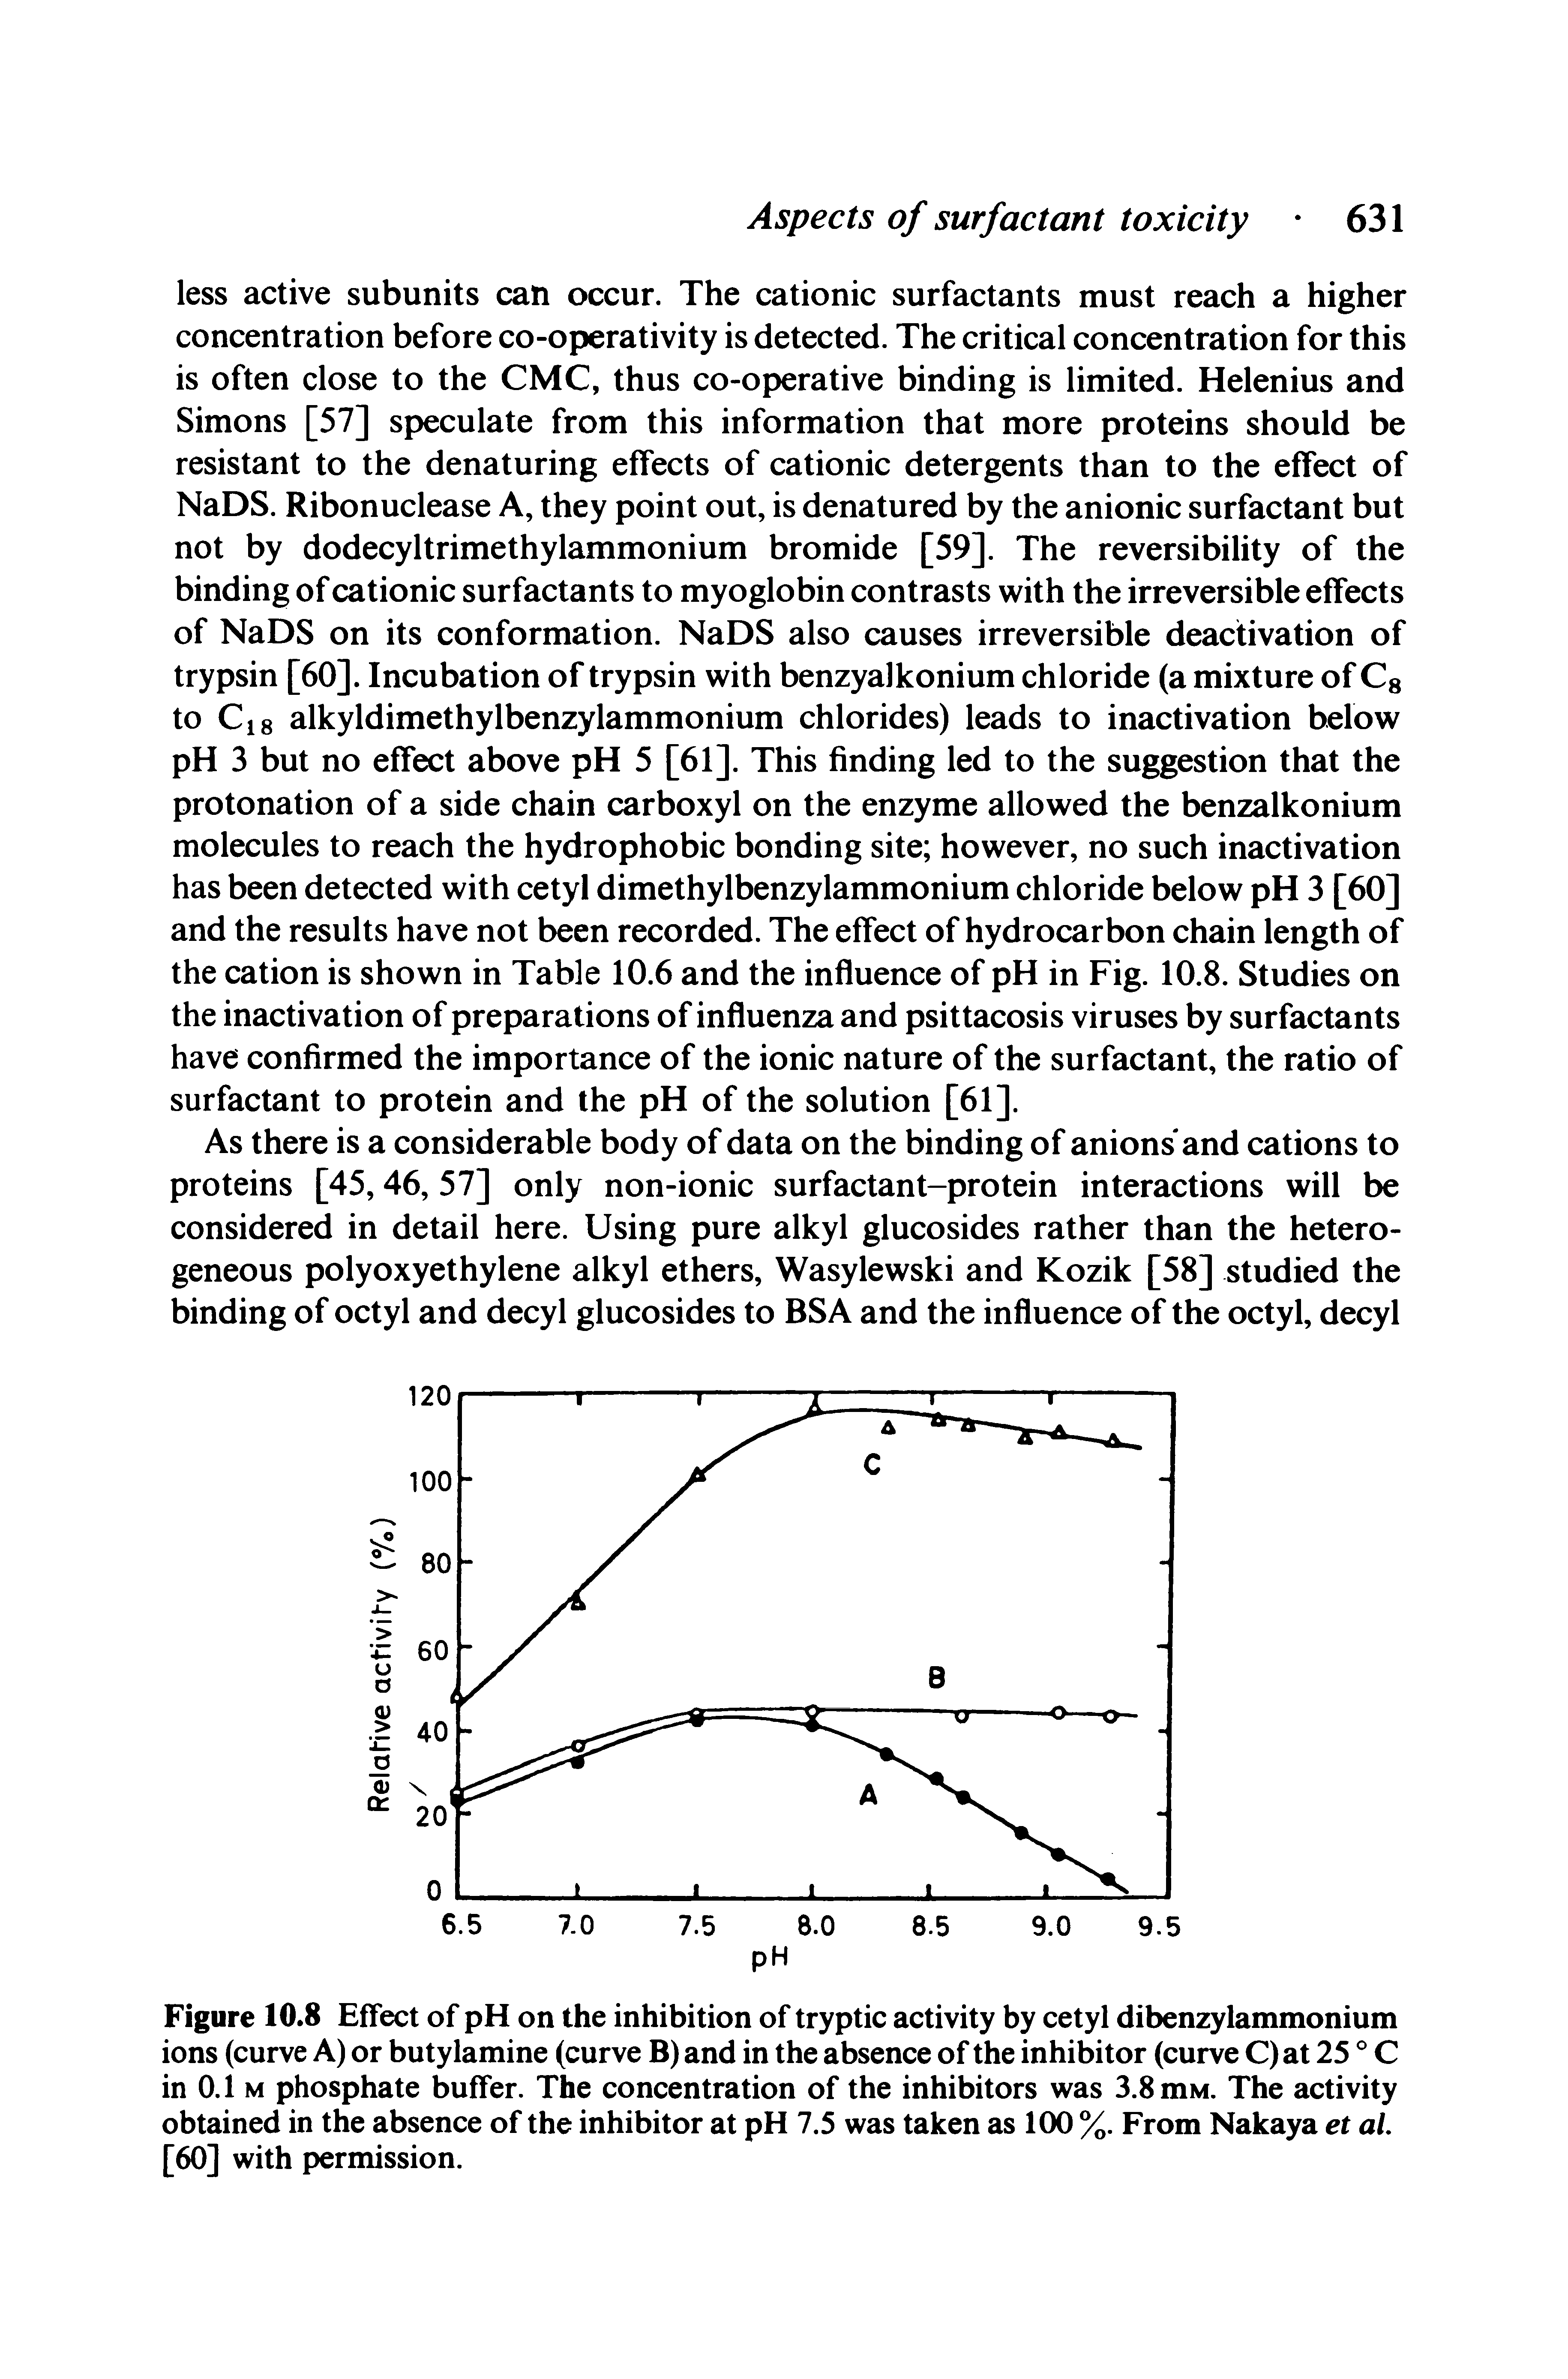 Figure 10.8 Effect of pH on the inhibition of tryptic activity by cetyl dibenzylammonium ions (curve A) or butylamine (curve B) and in the absence of the inhibitor (curve C)at 25 C in 0.1 M phosphate buffer. The concentration of the inhibitors was 3.8 mM. The activity obtained in the absence of the inhibitor at pH 7.5 was taken as 100 %. From Nakaya et al, [60] with permission.